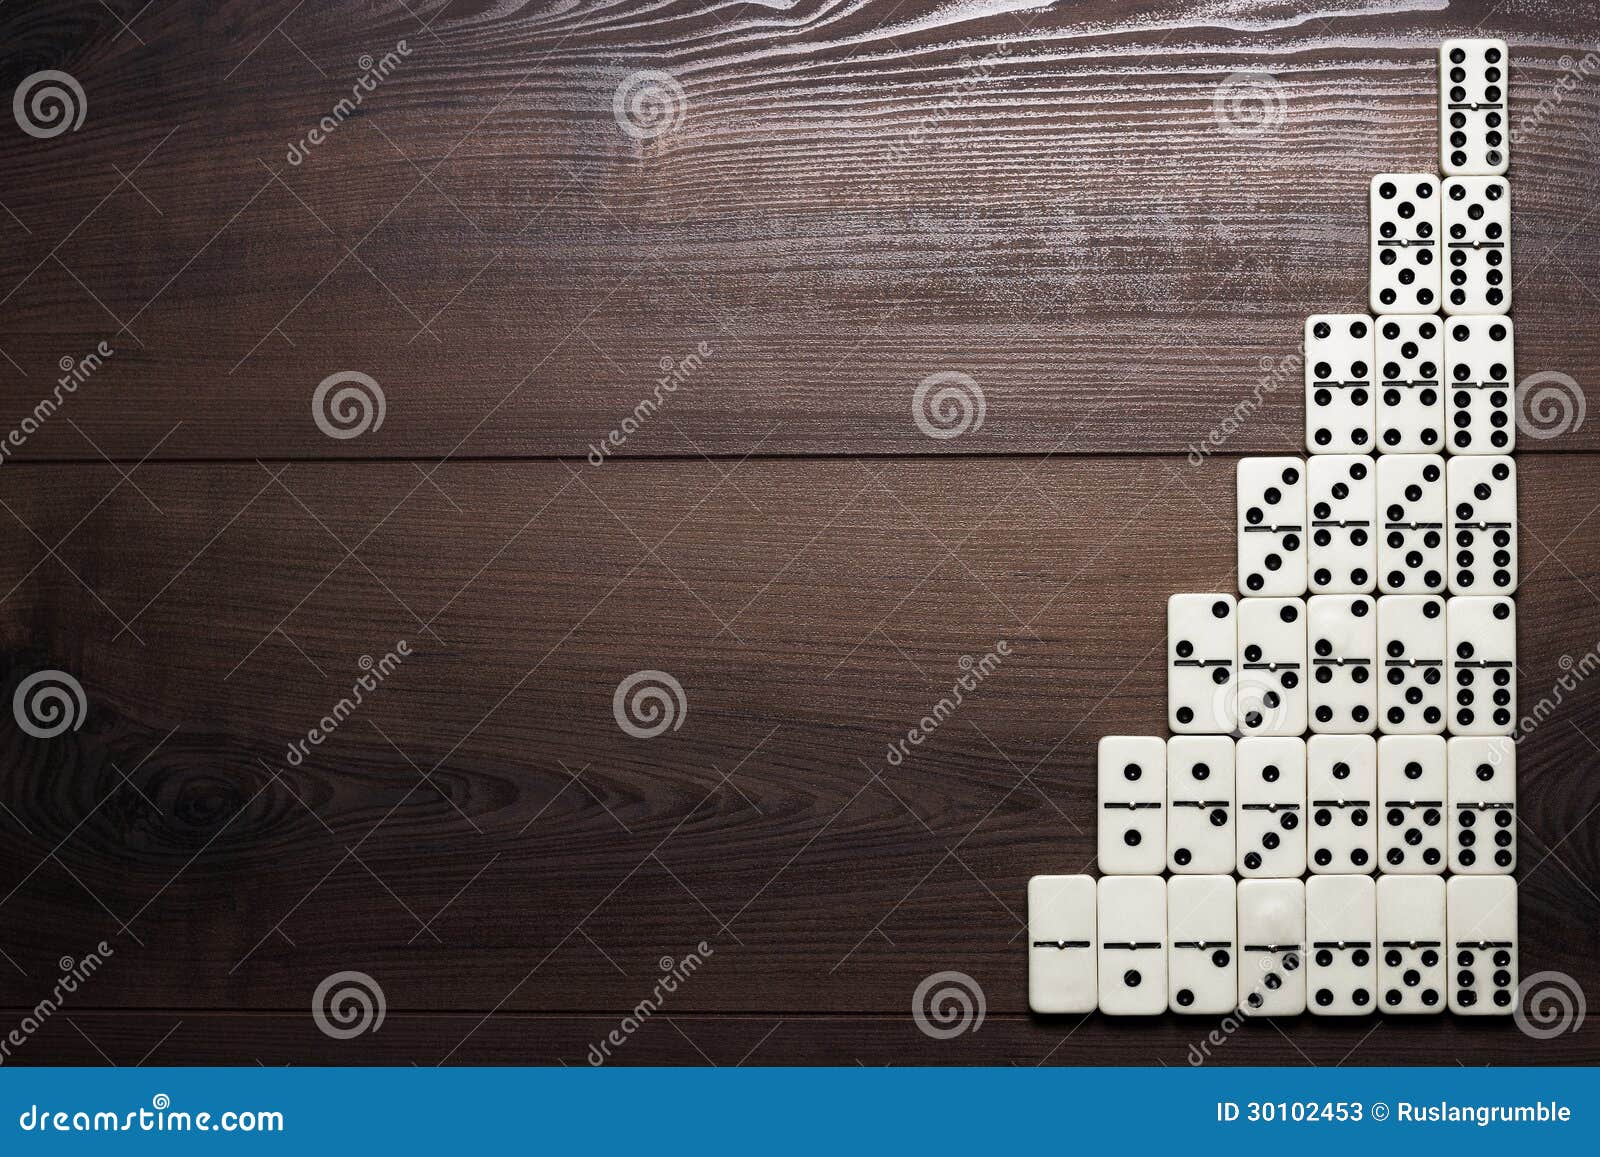 Stock Photos: Full set of domino pieces on wooden table